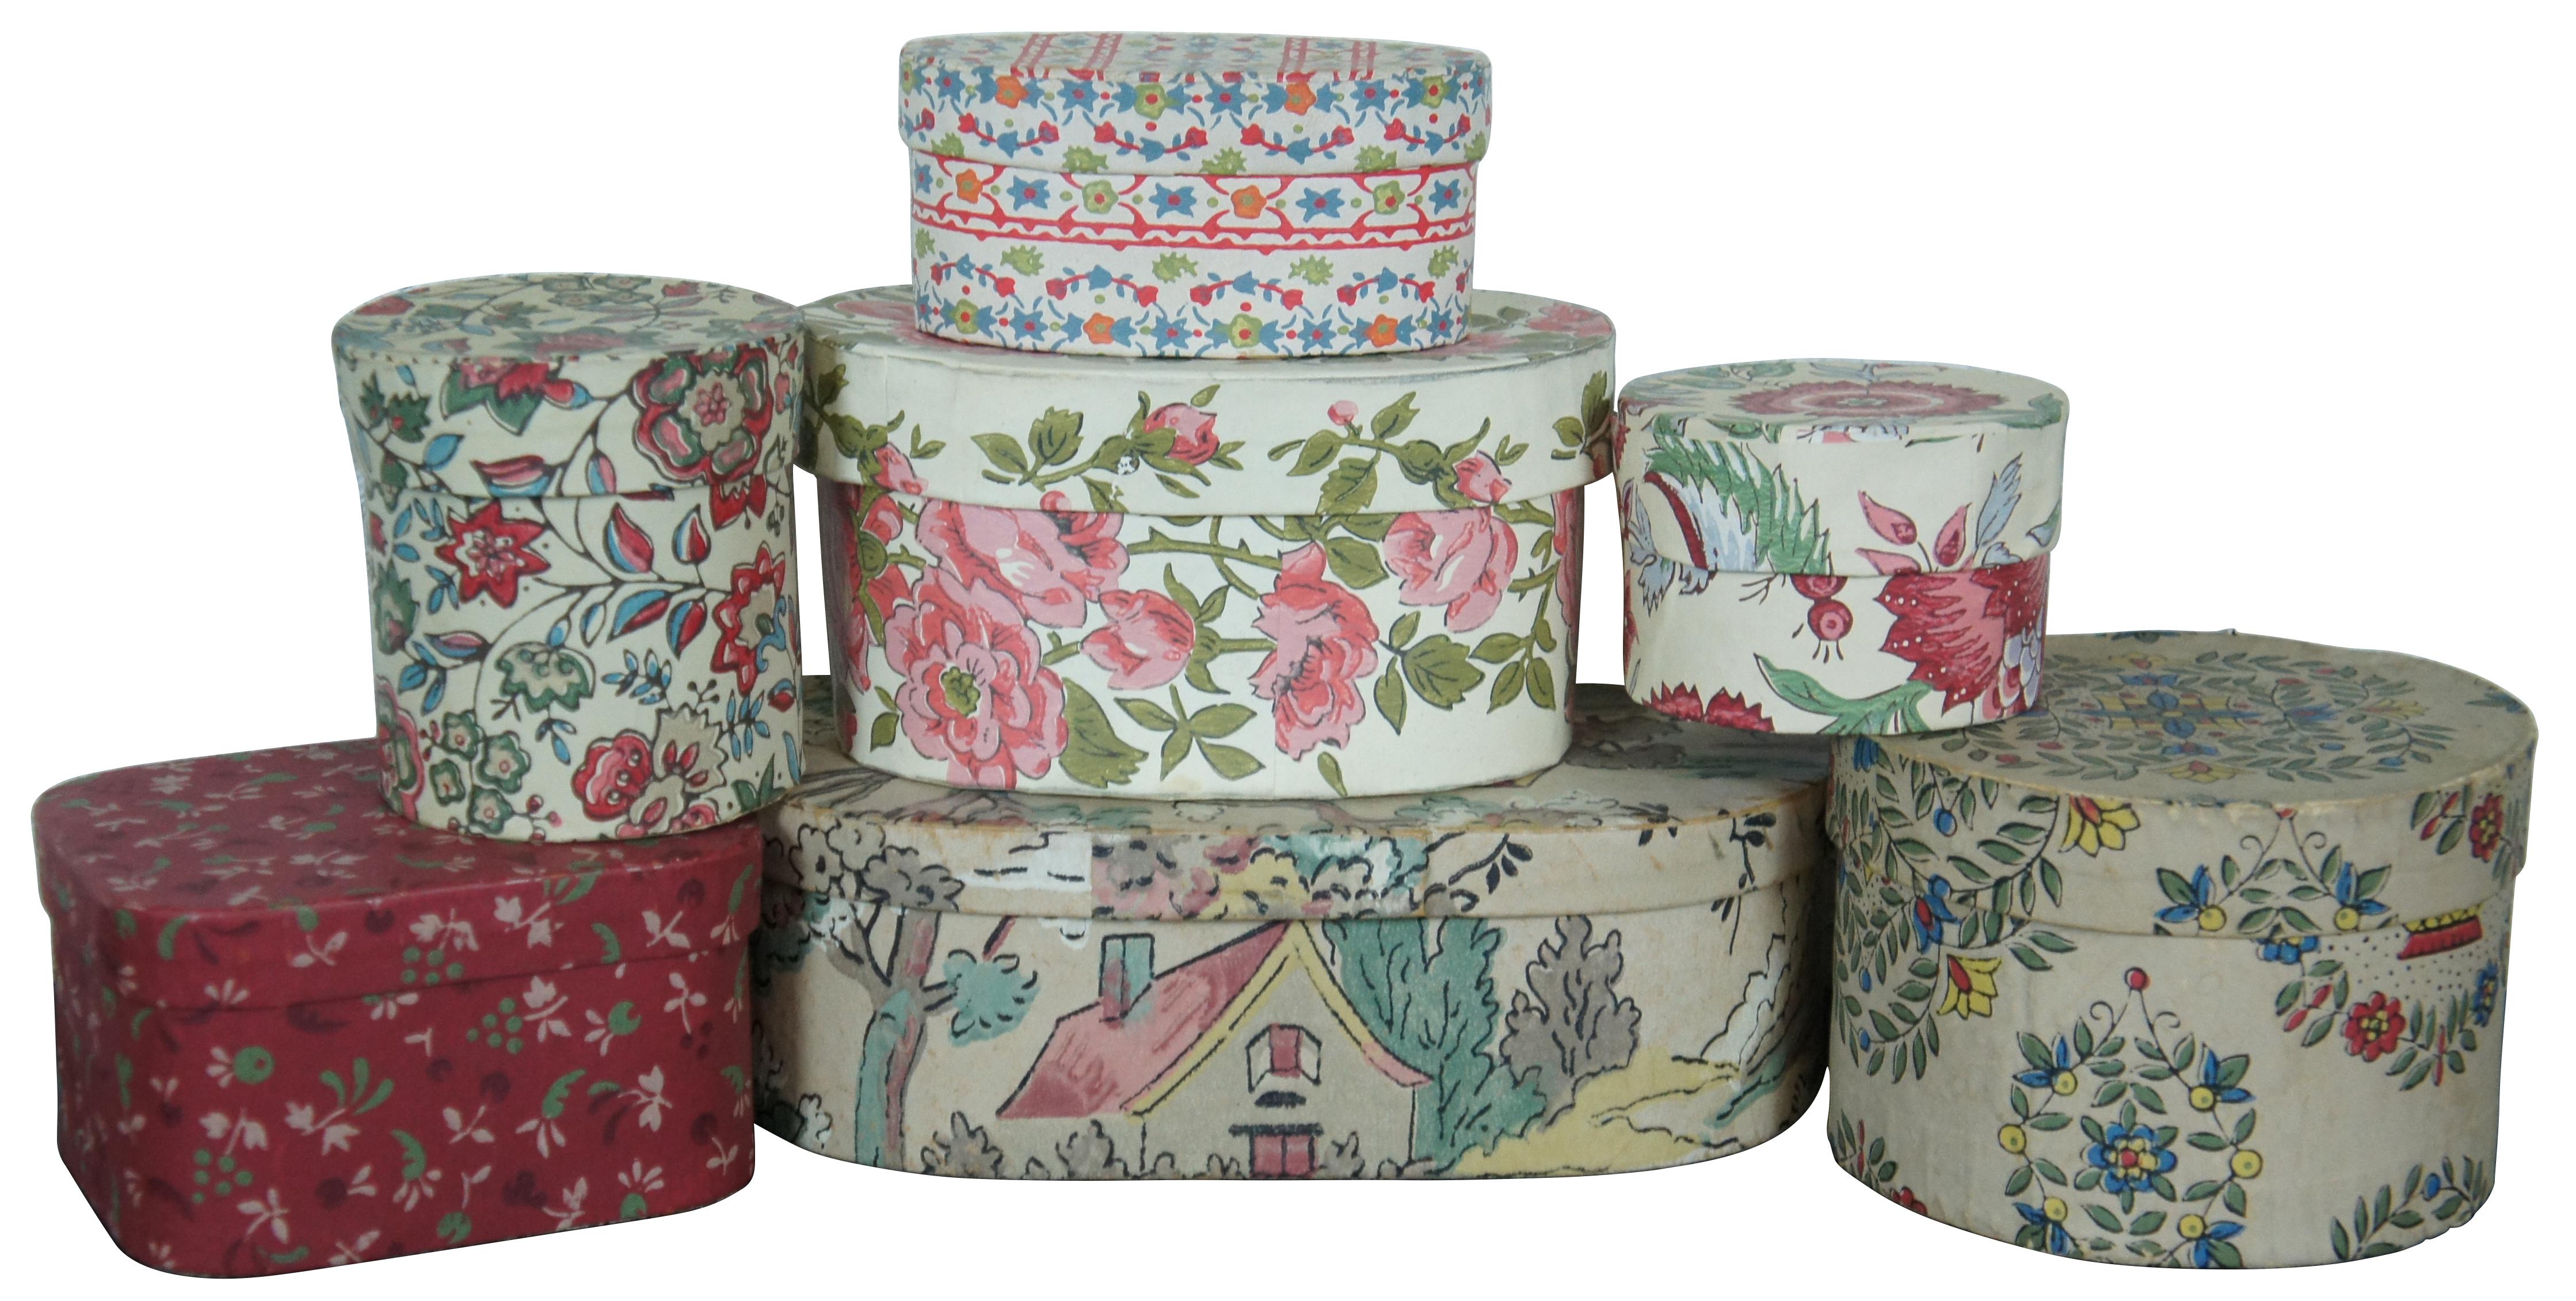 Twelve vintage and antique 20th century paper band boxes of various sizes, some nesting and finished in a variety of patterned papers and lined with book / magazine pages. 

Largest - 15” x 11.75” x 14.25” / smallest - 3” x 1.75” (width x depth x